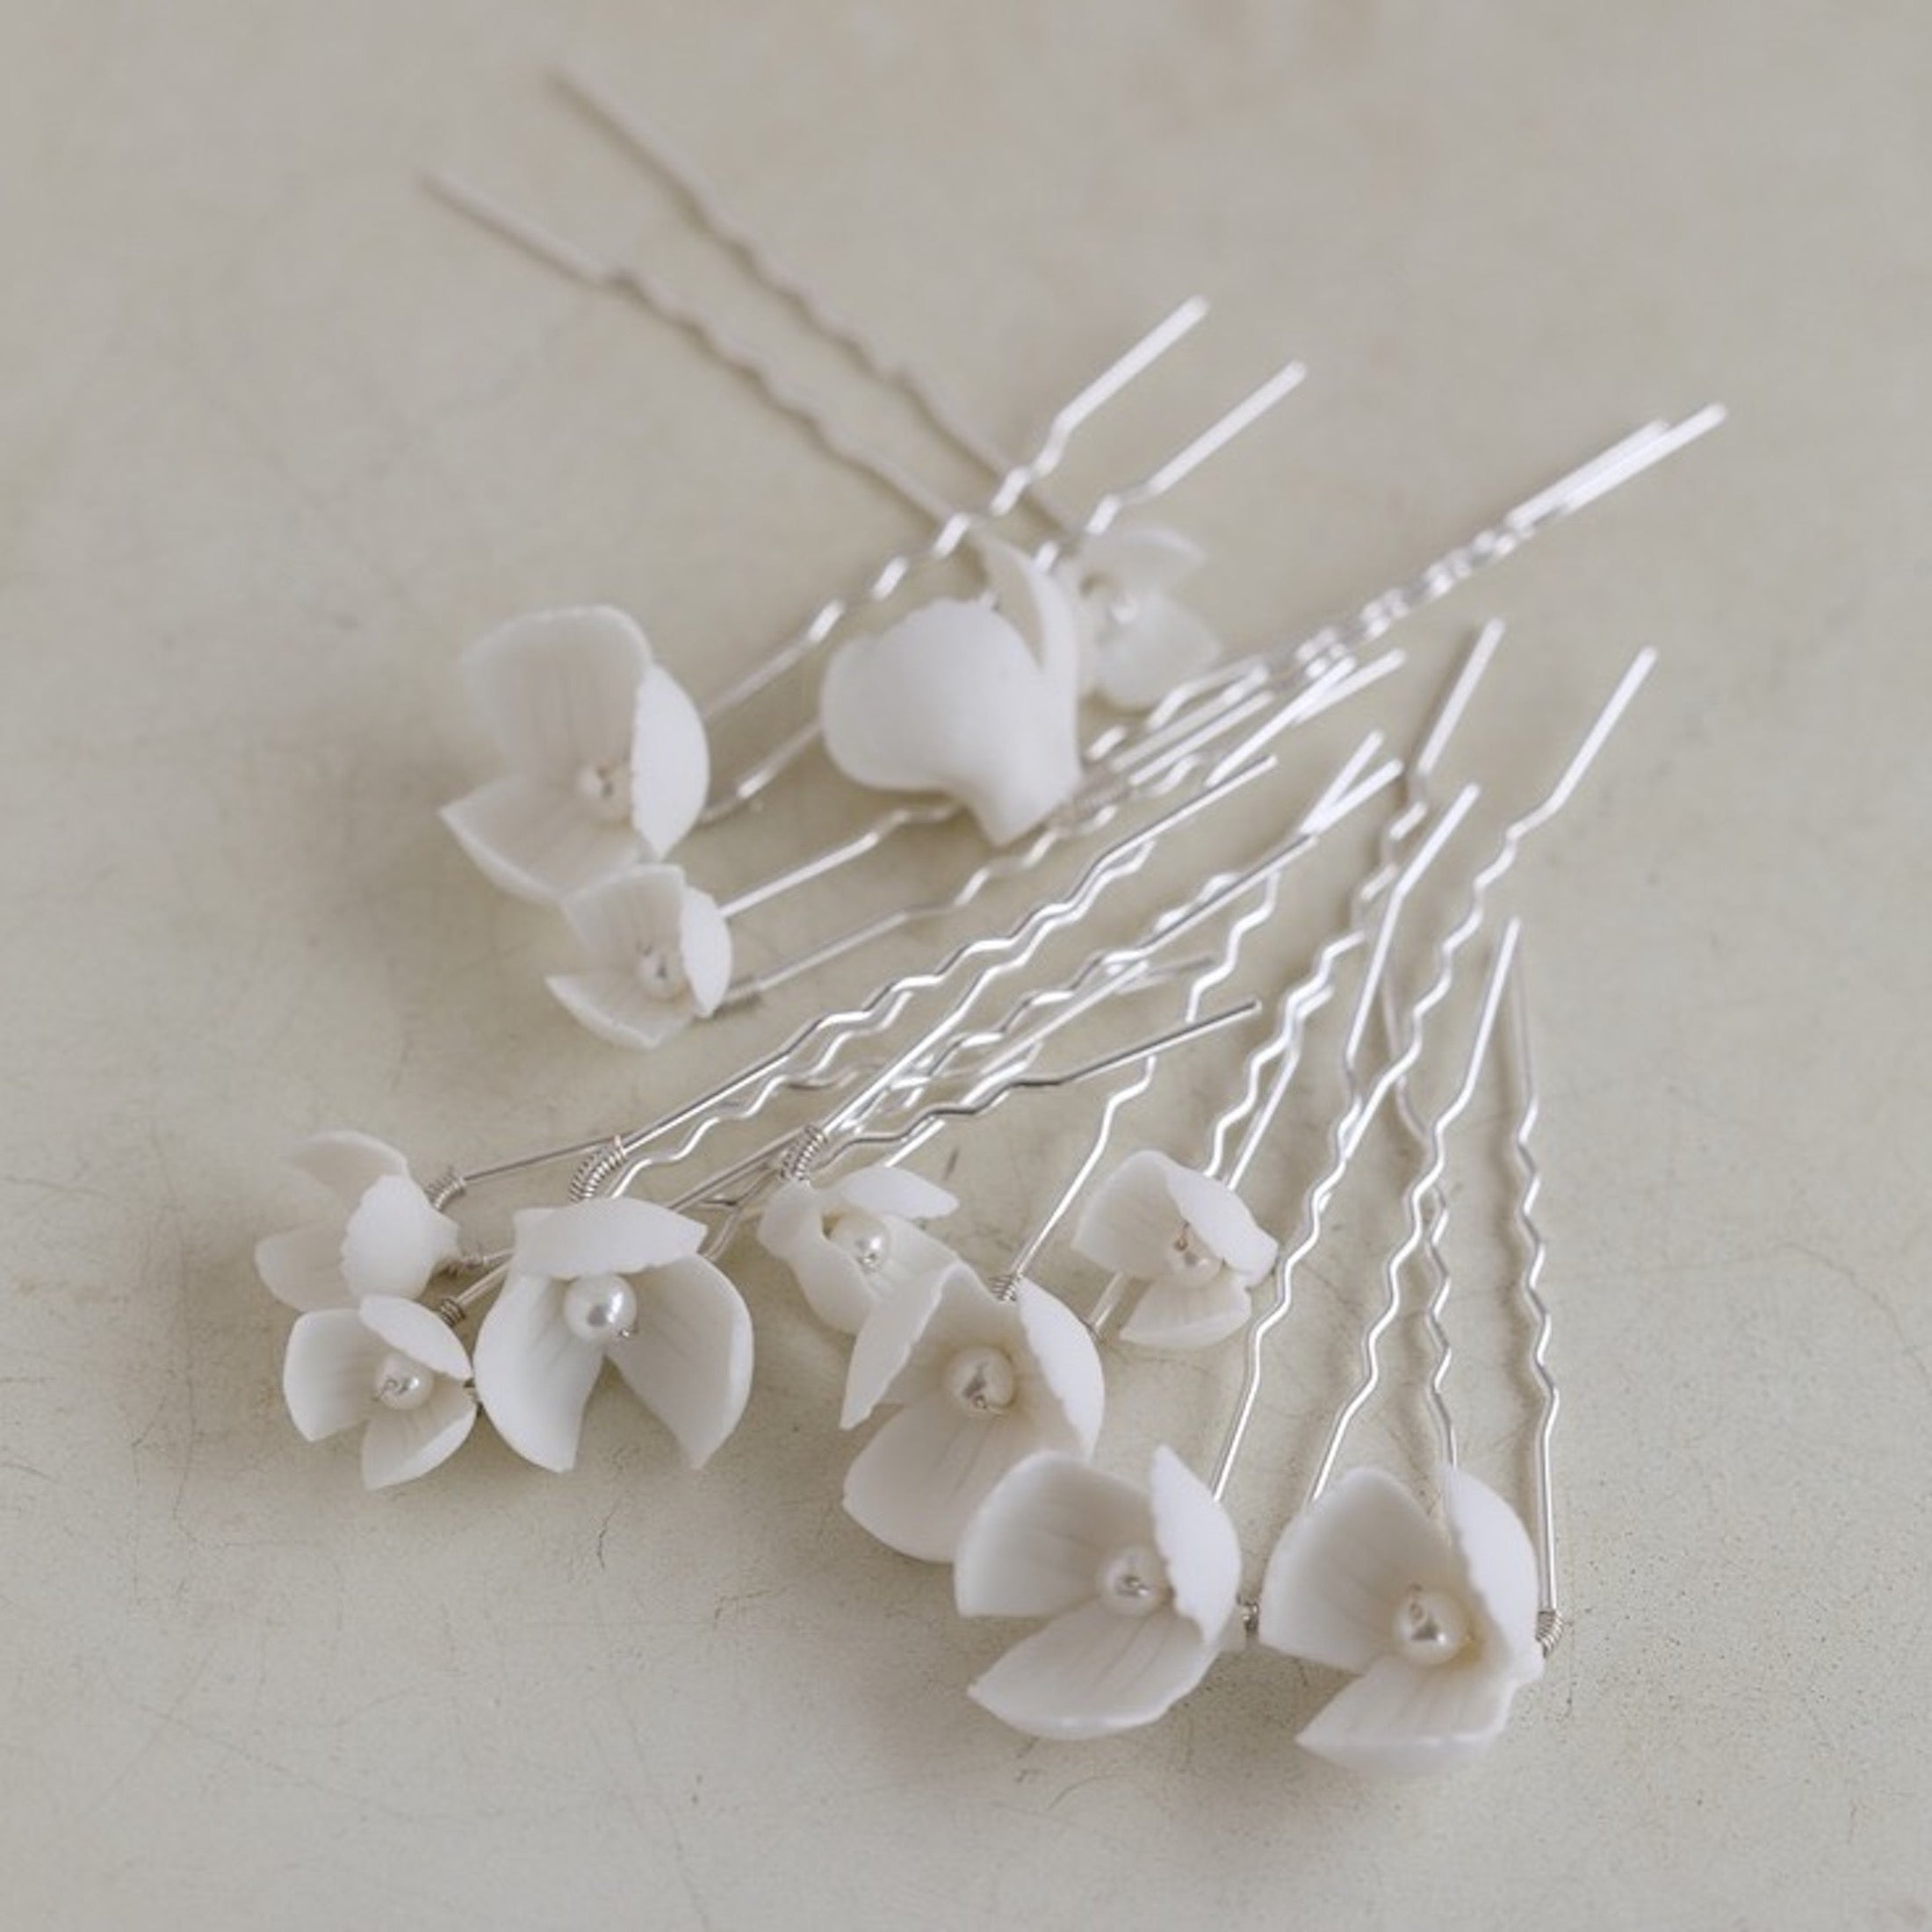 Handcrafted white ceramic flowers bridal hairpin set-One set of 8